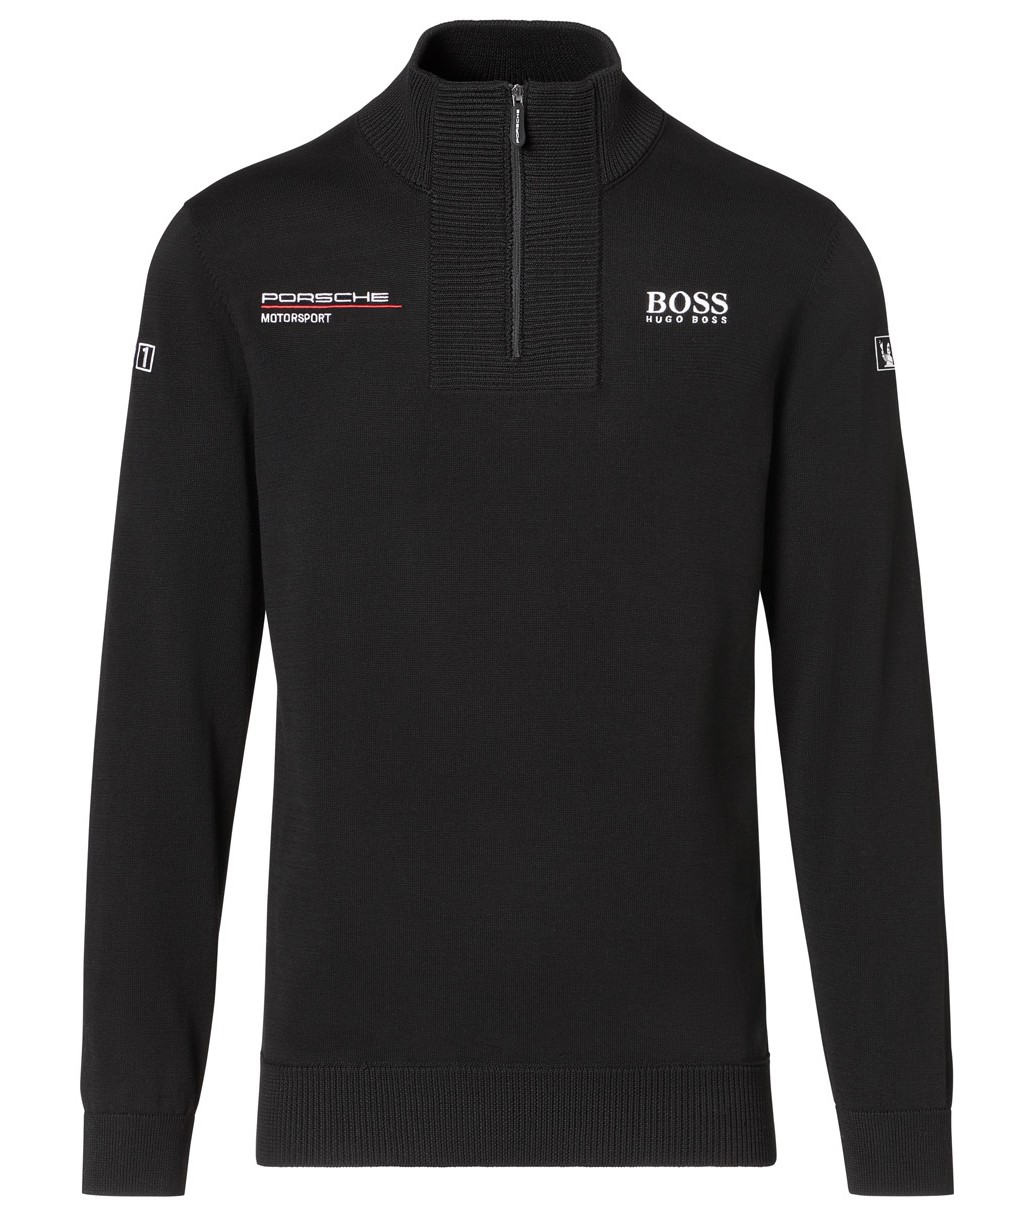 Unisex Pullover - Motorsport Collection zoom